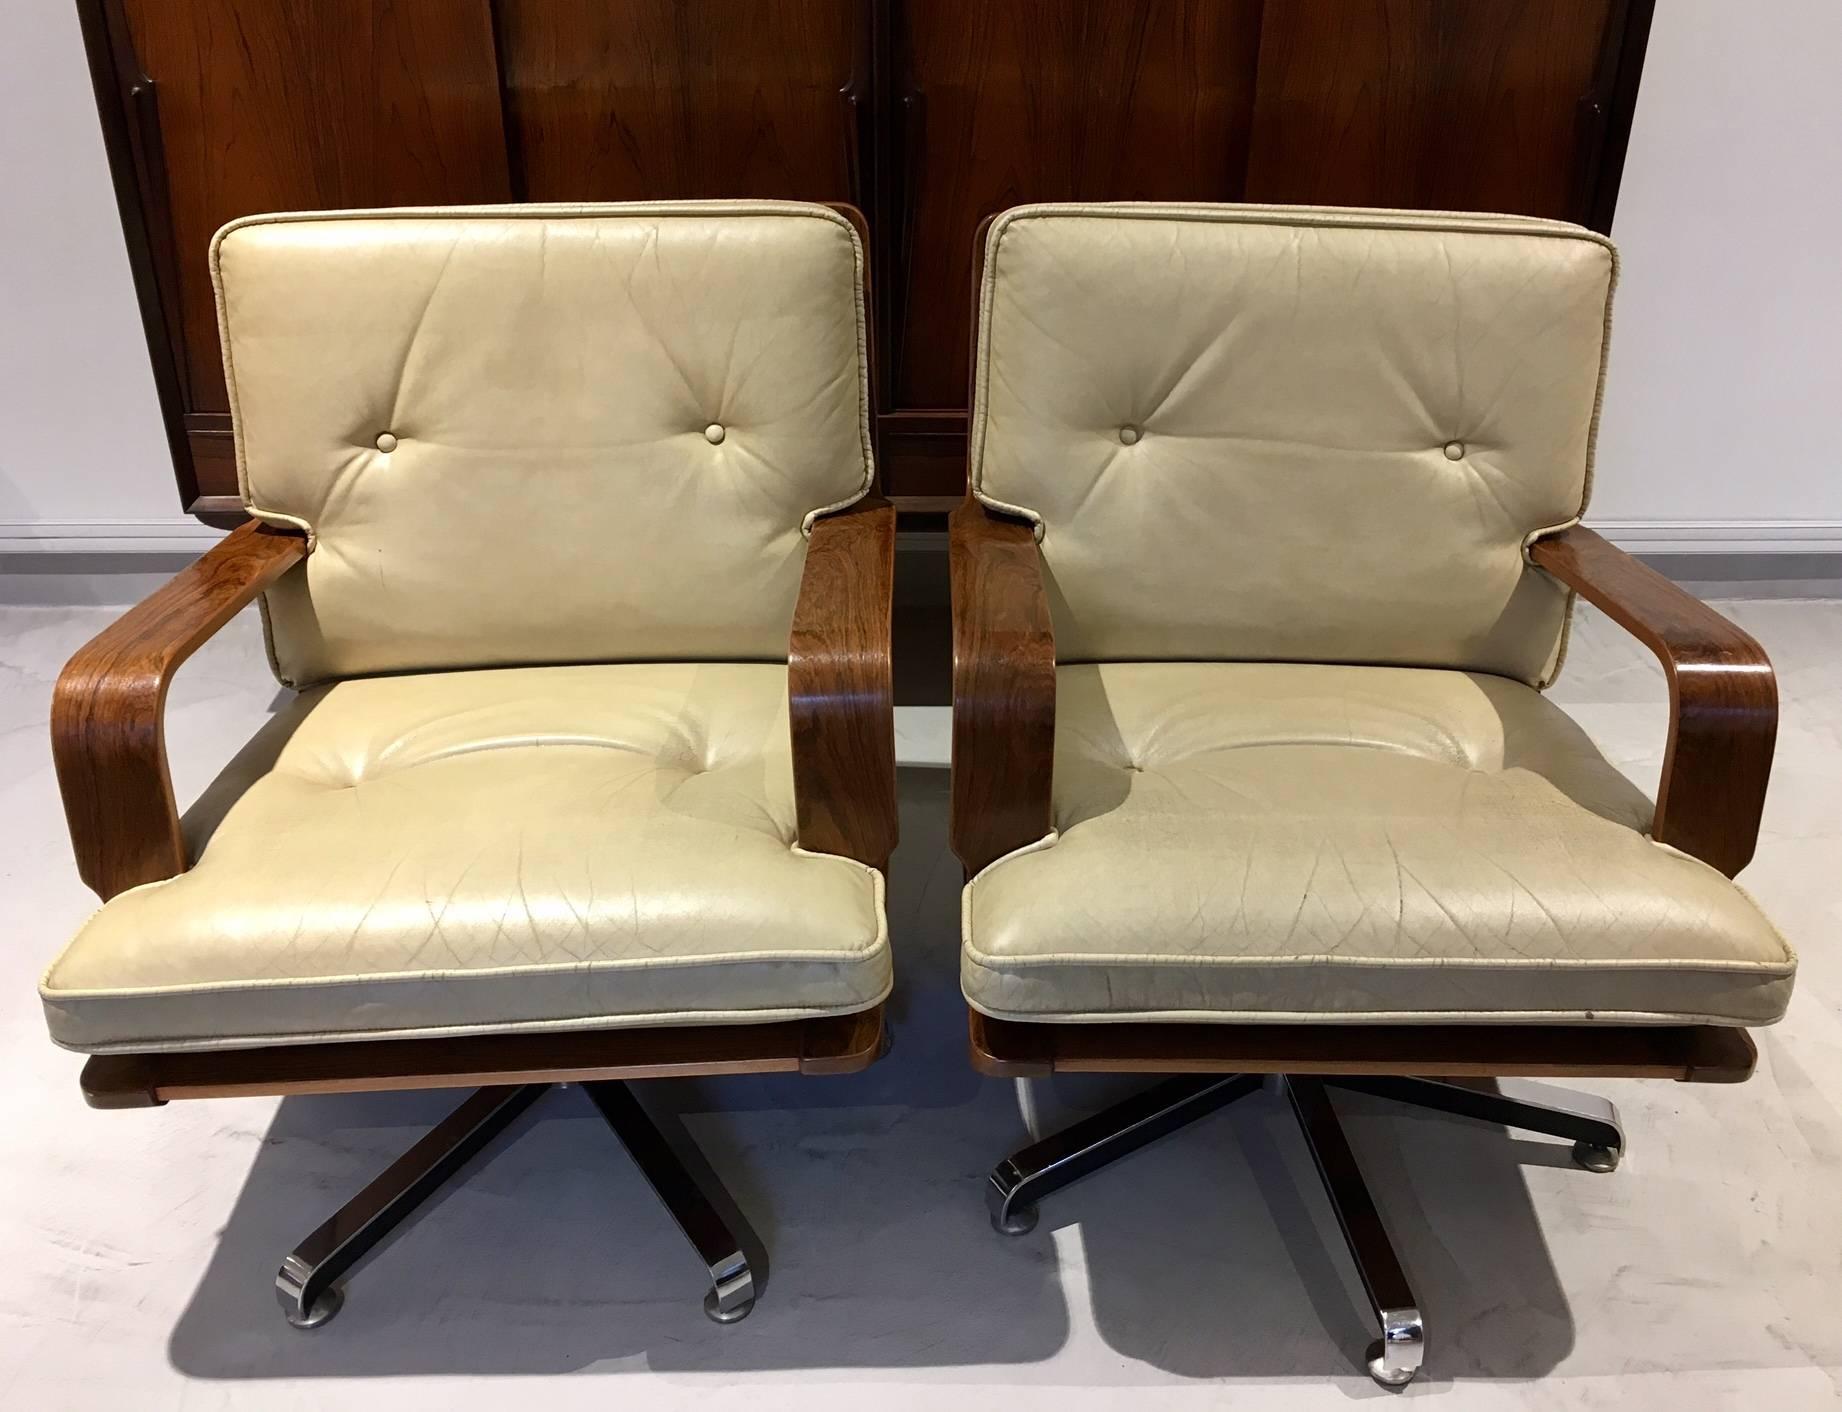 Pair of handmade cream-colored leather swivel armchairs with a steel base and solid rosewood frame. Button tufted upholstery. Made by AG Barcelona in Spain during the 1980s.